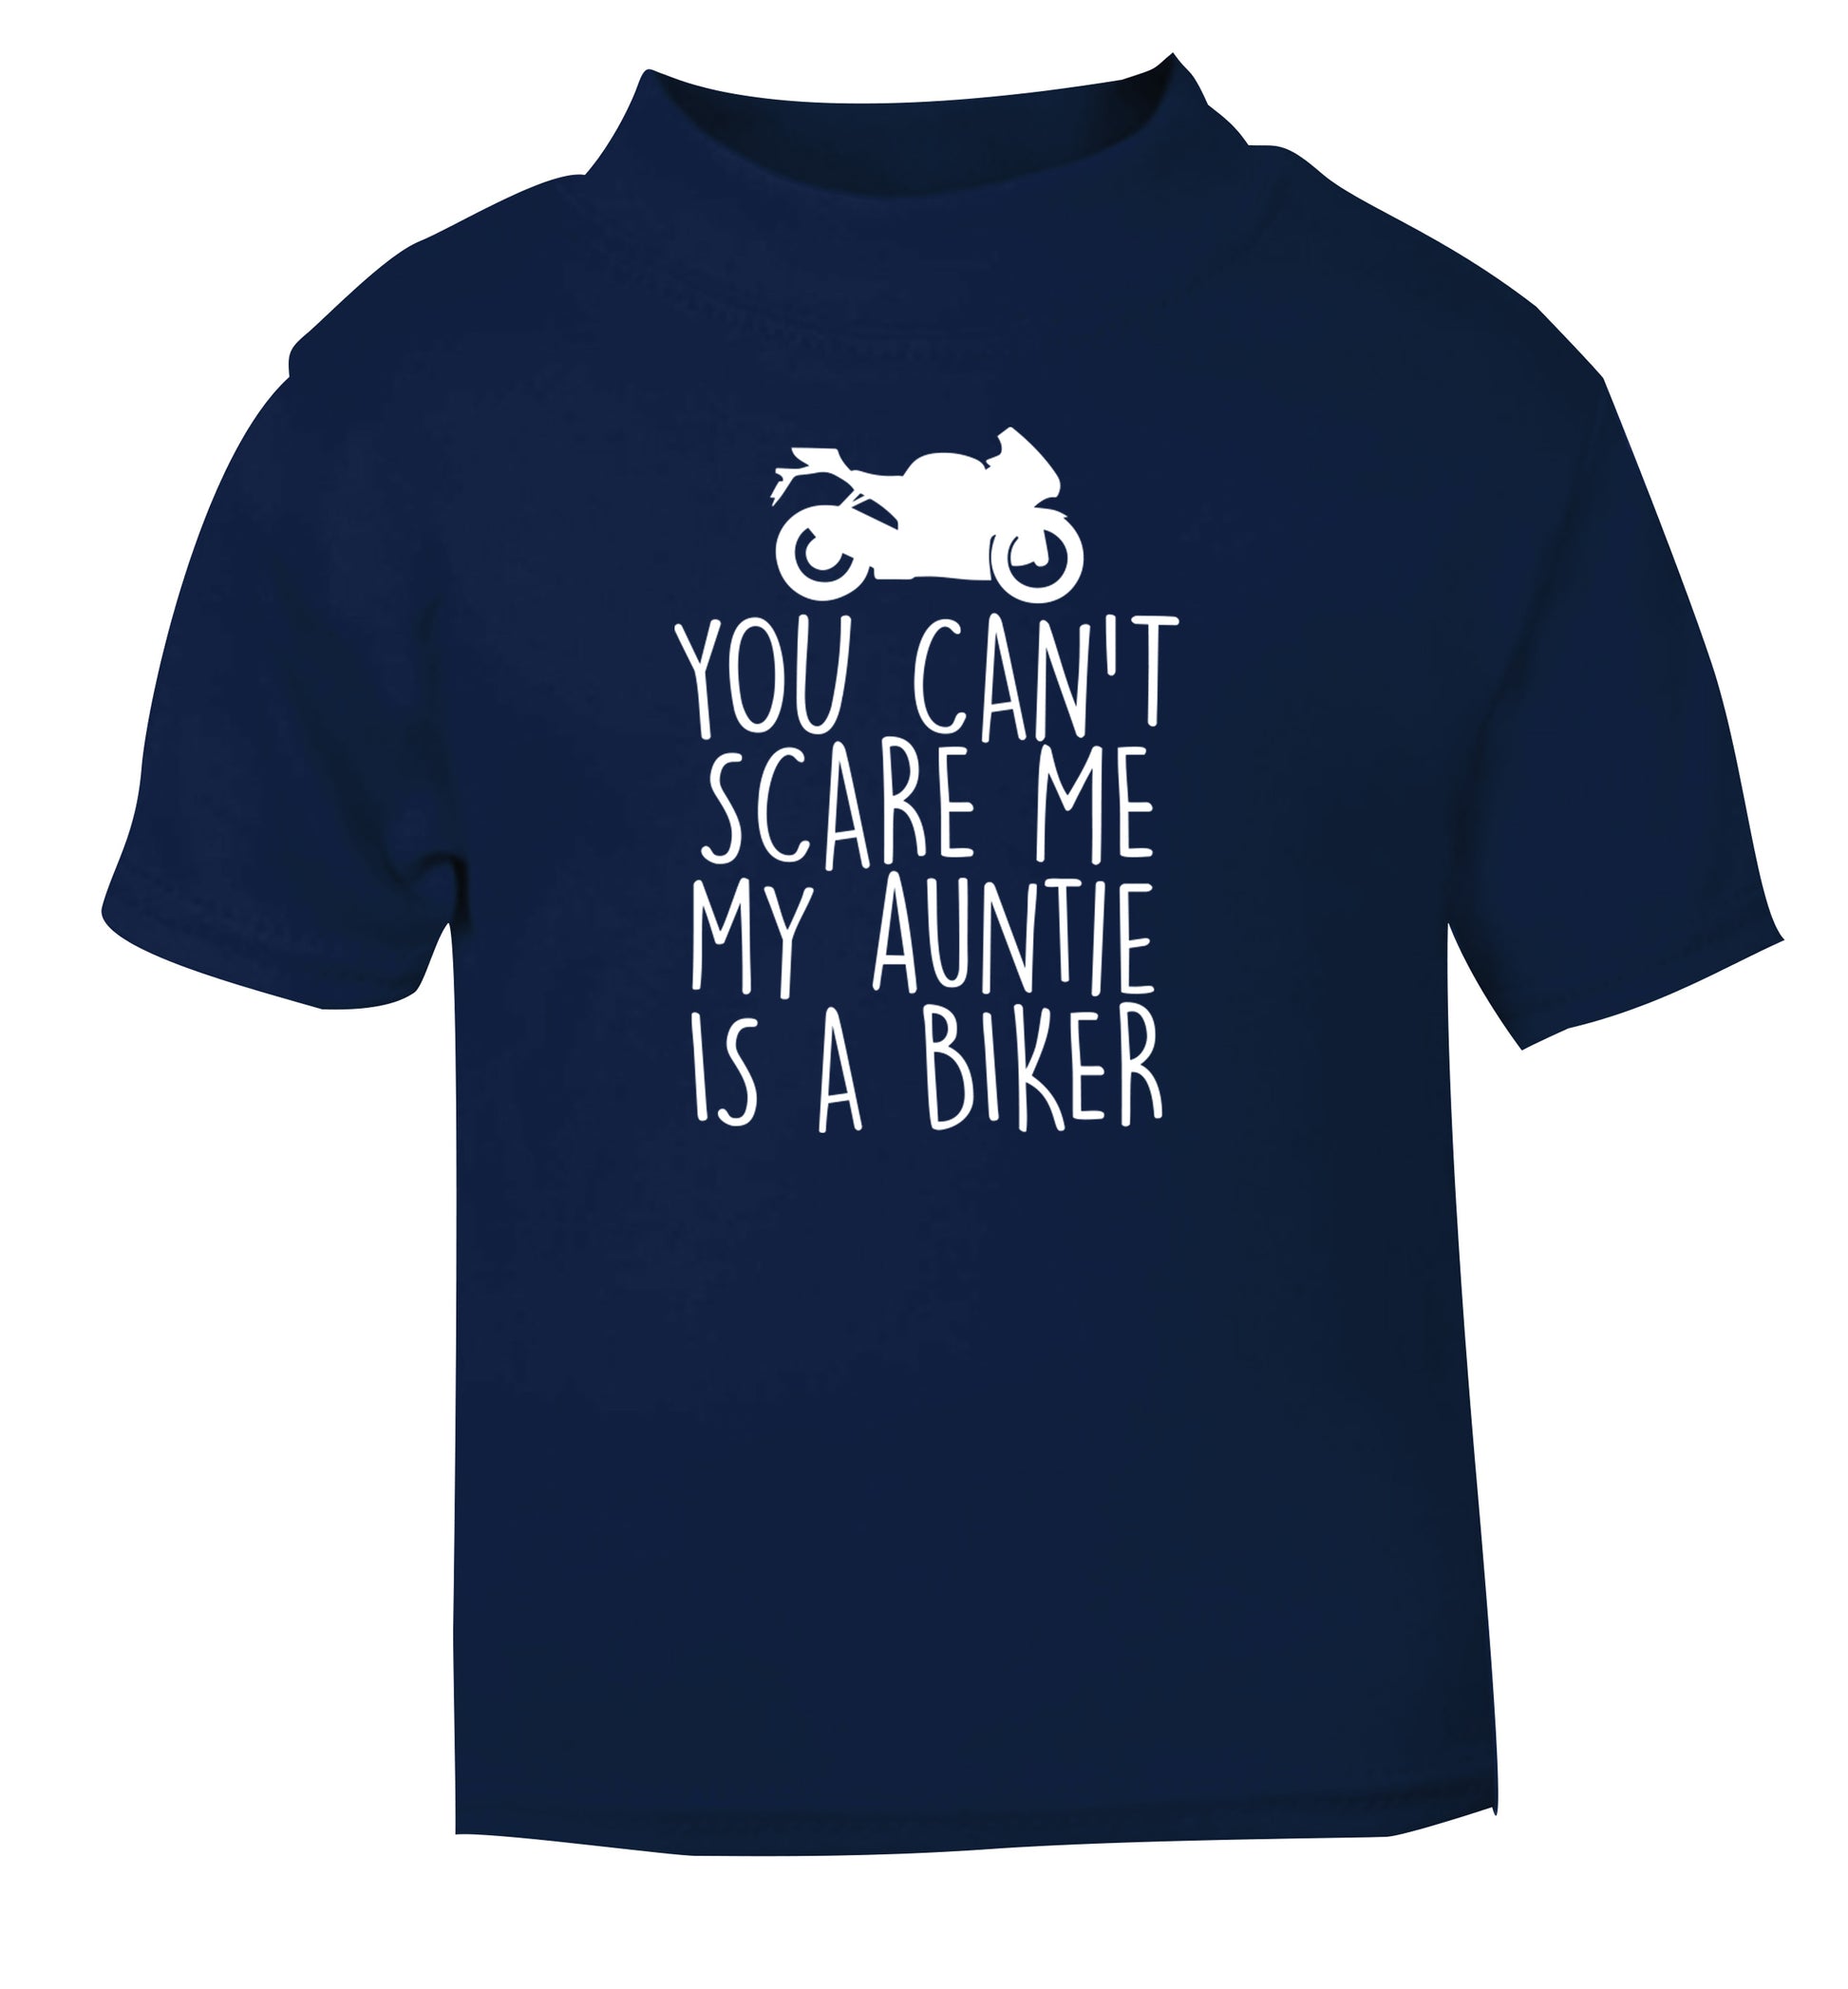 You can't scare me my auntie is a biker navy Baby Toddler Tshirt 2 Years